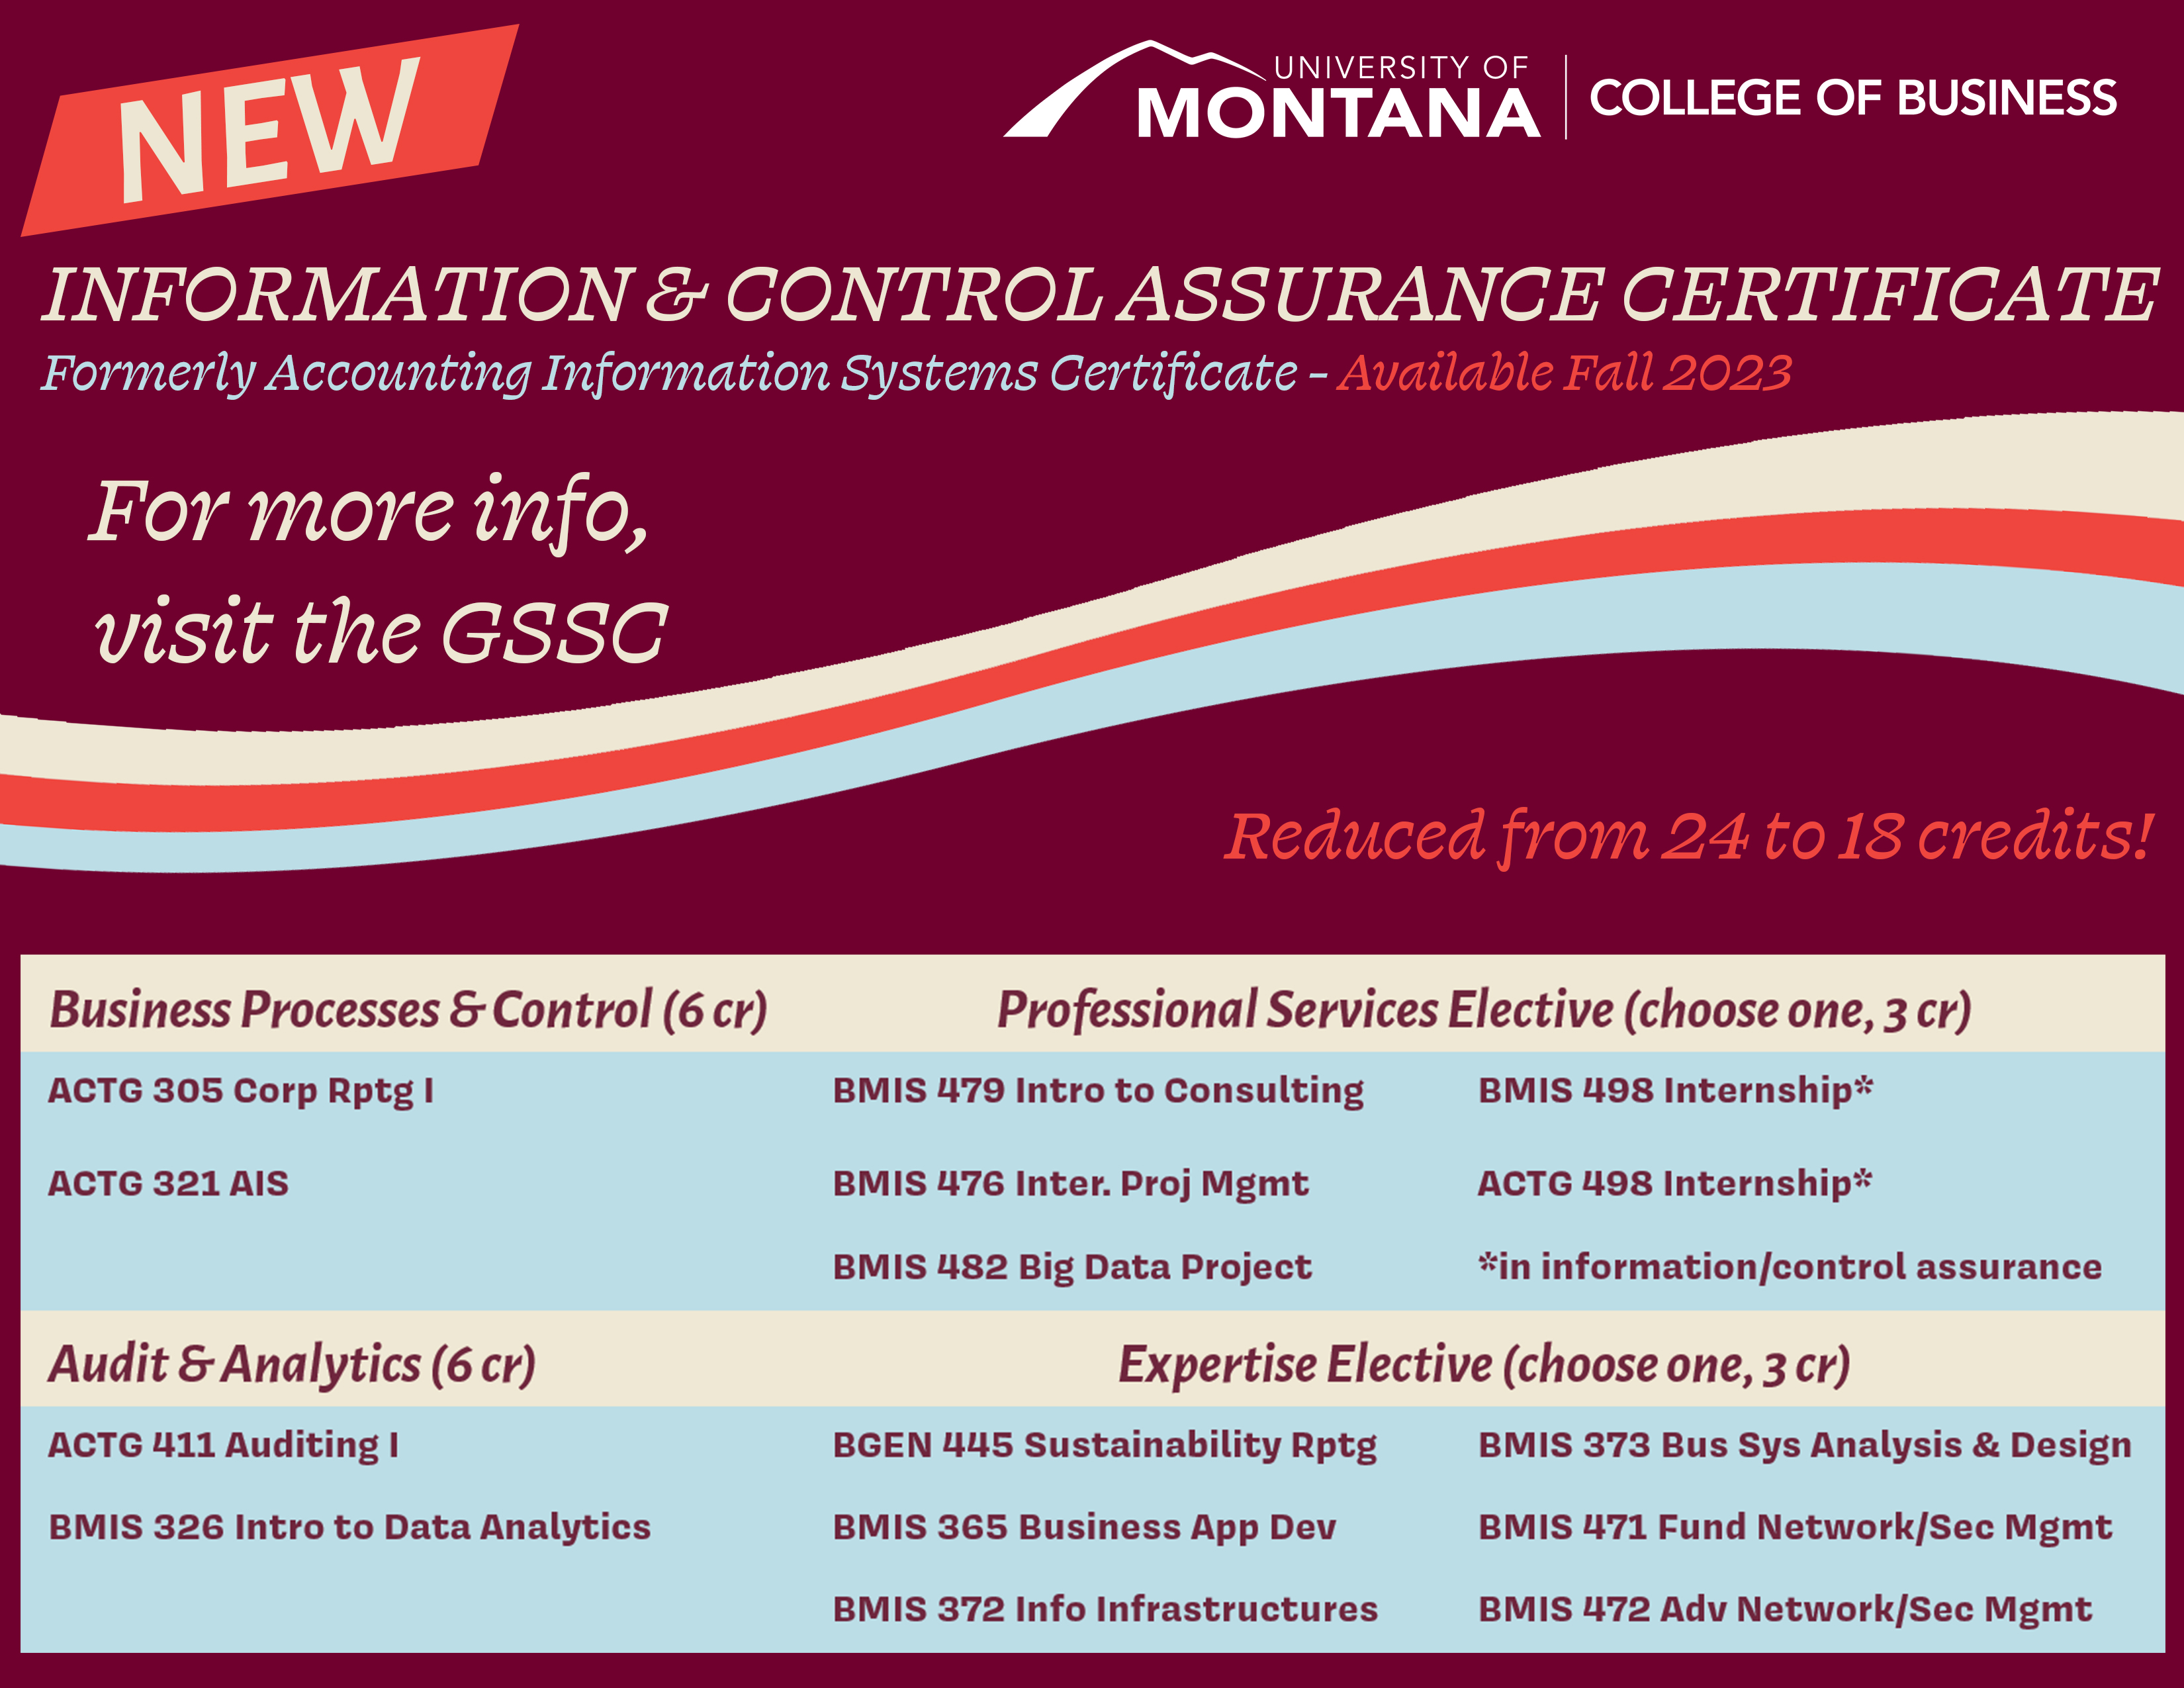 Information & Control Assurance (ICA) certificate information